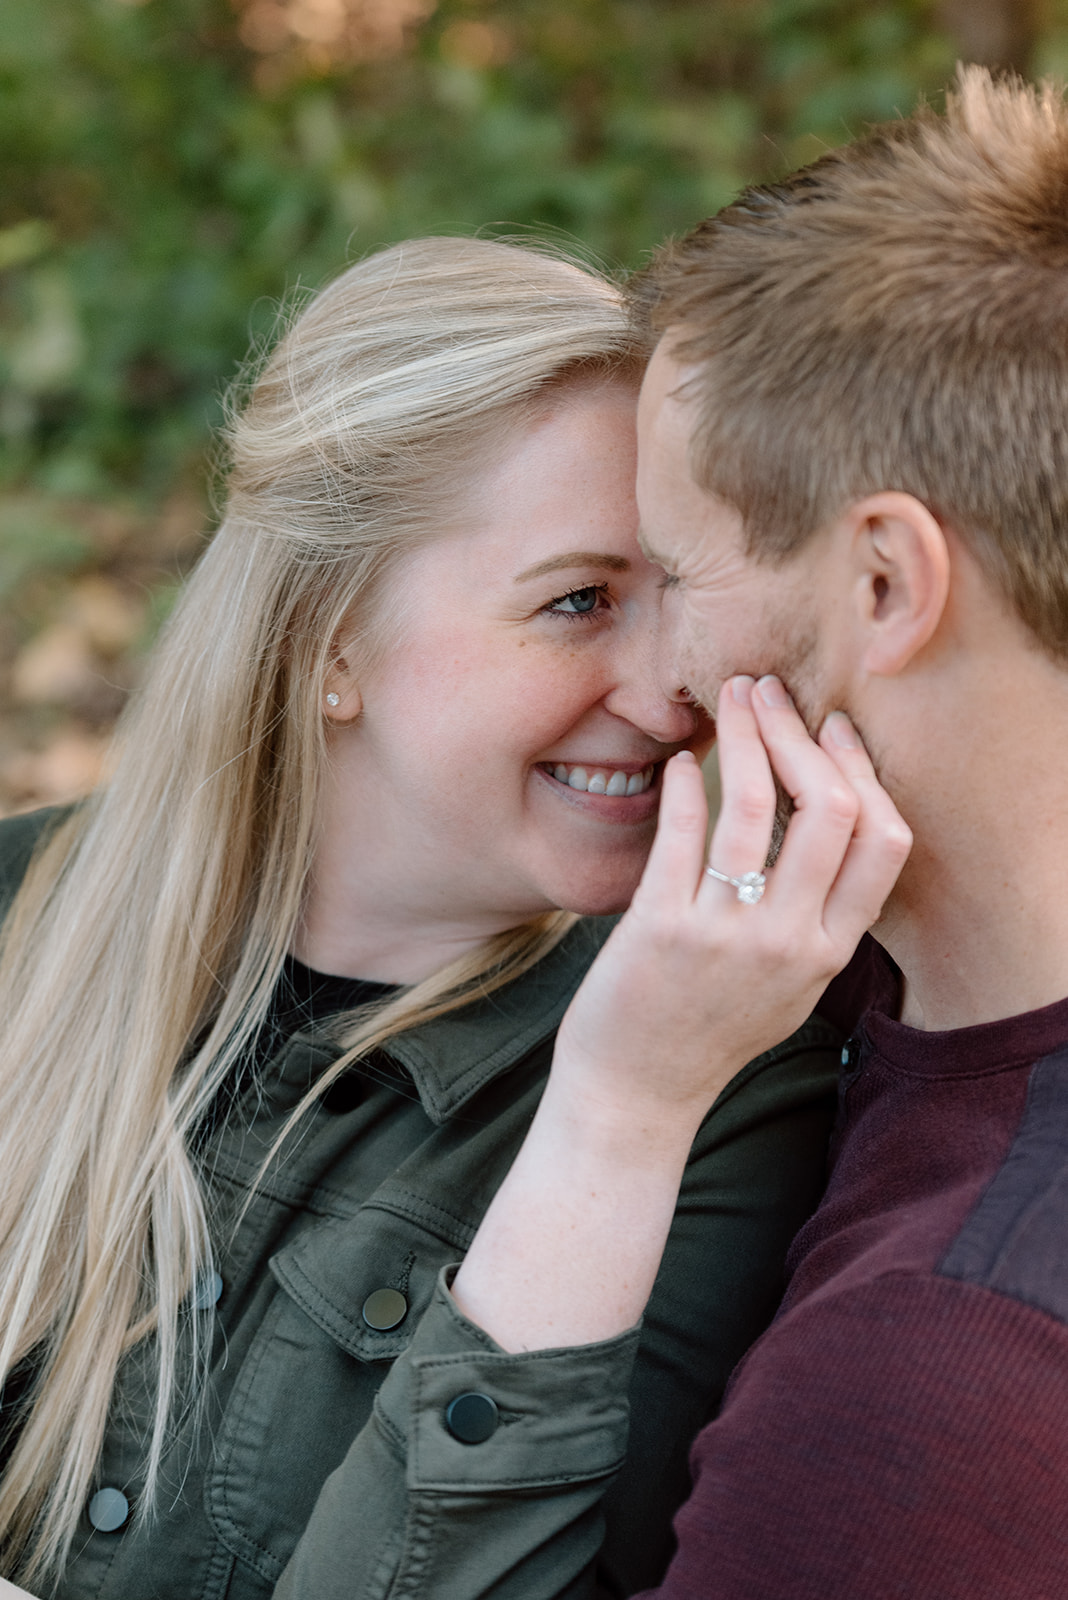 Woman snuggled up with her fiance Minneapolis engagement photos